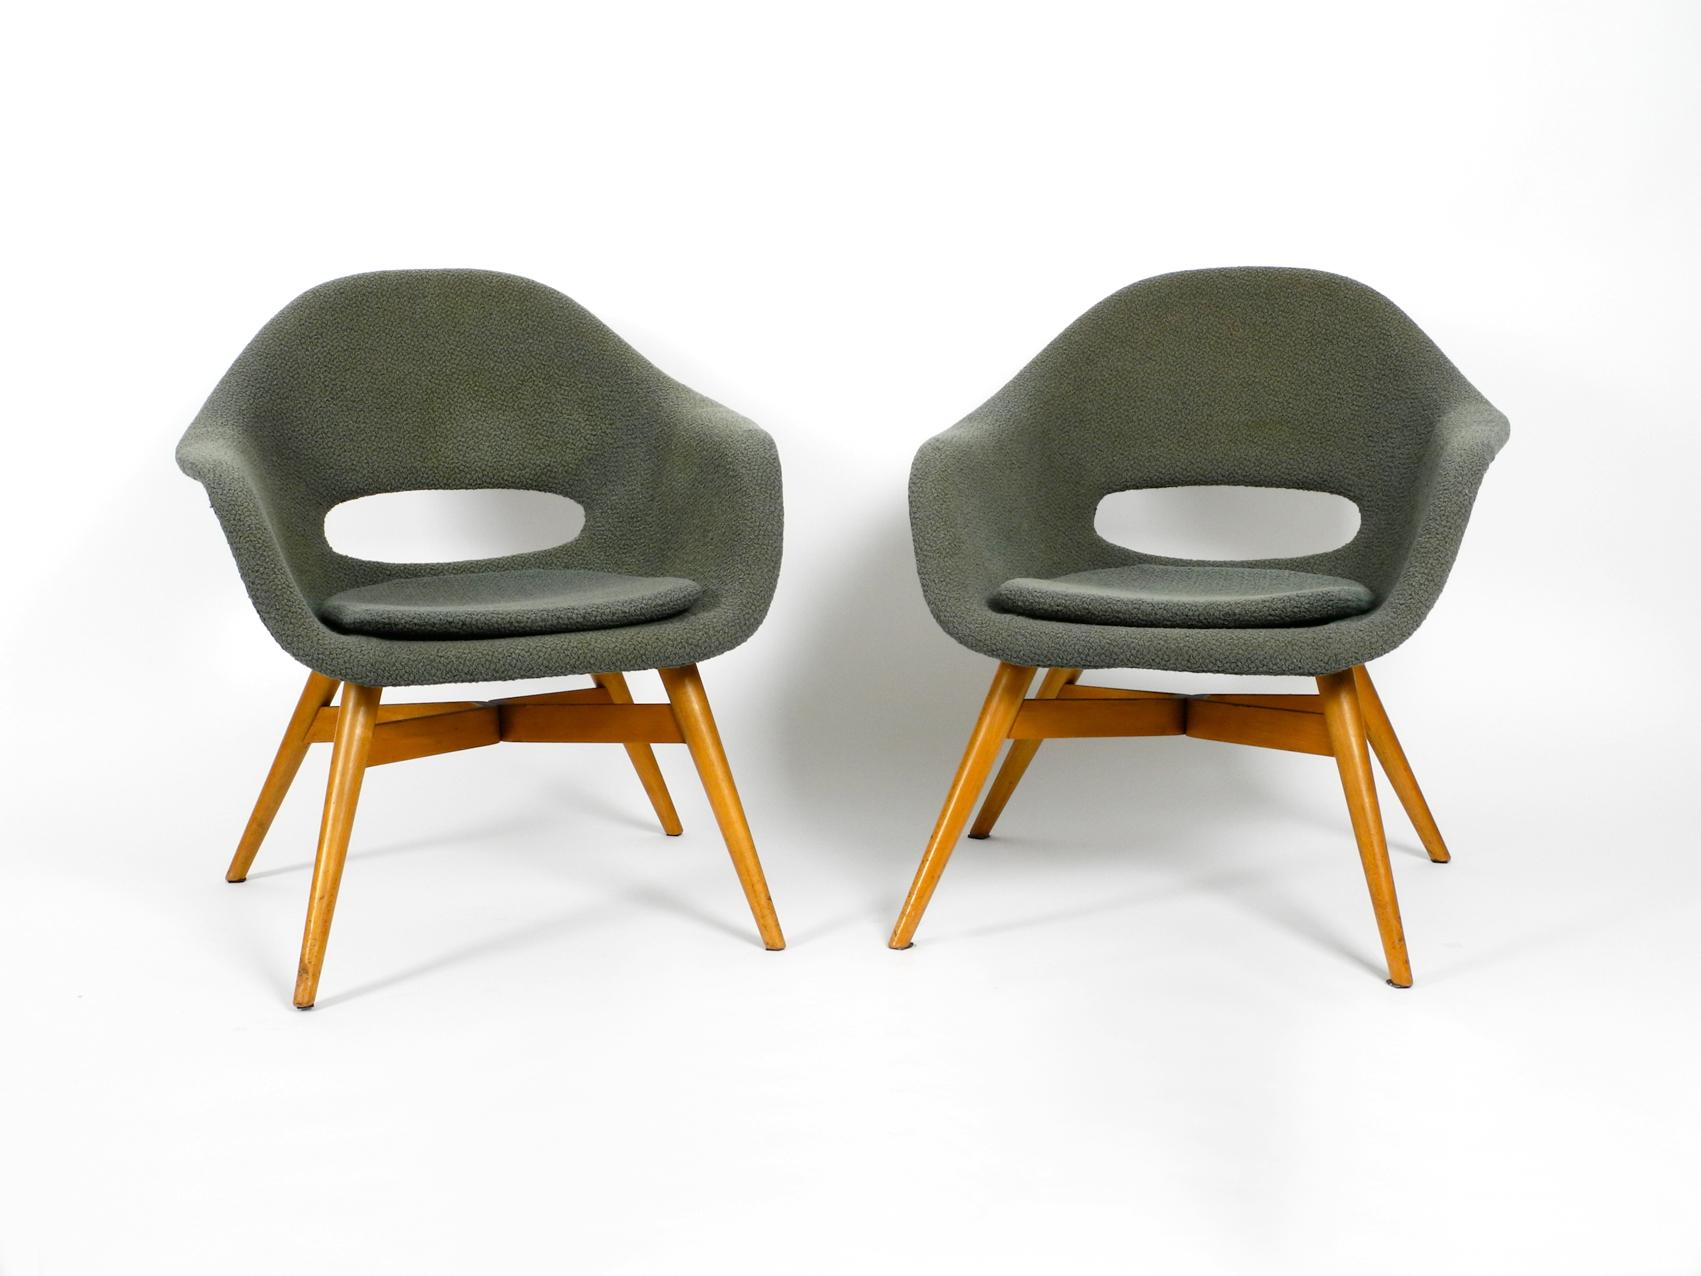 Pair of rare Mid-Century Modern 1960s lounge chairs by Miroslav Navratil with 
fiberglass shell and original cover. A classic Made in the Czech Republic.
Frame made of solid wood and plywood. Very high quality manufactured. 
Very good seating